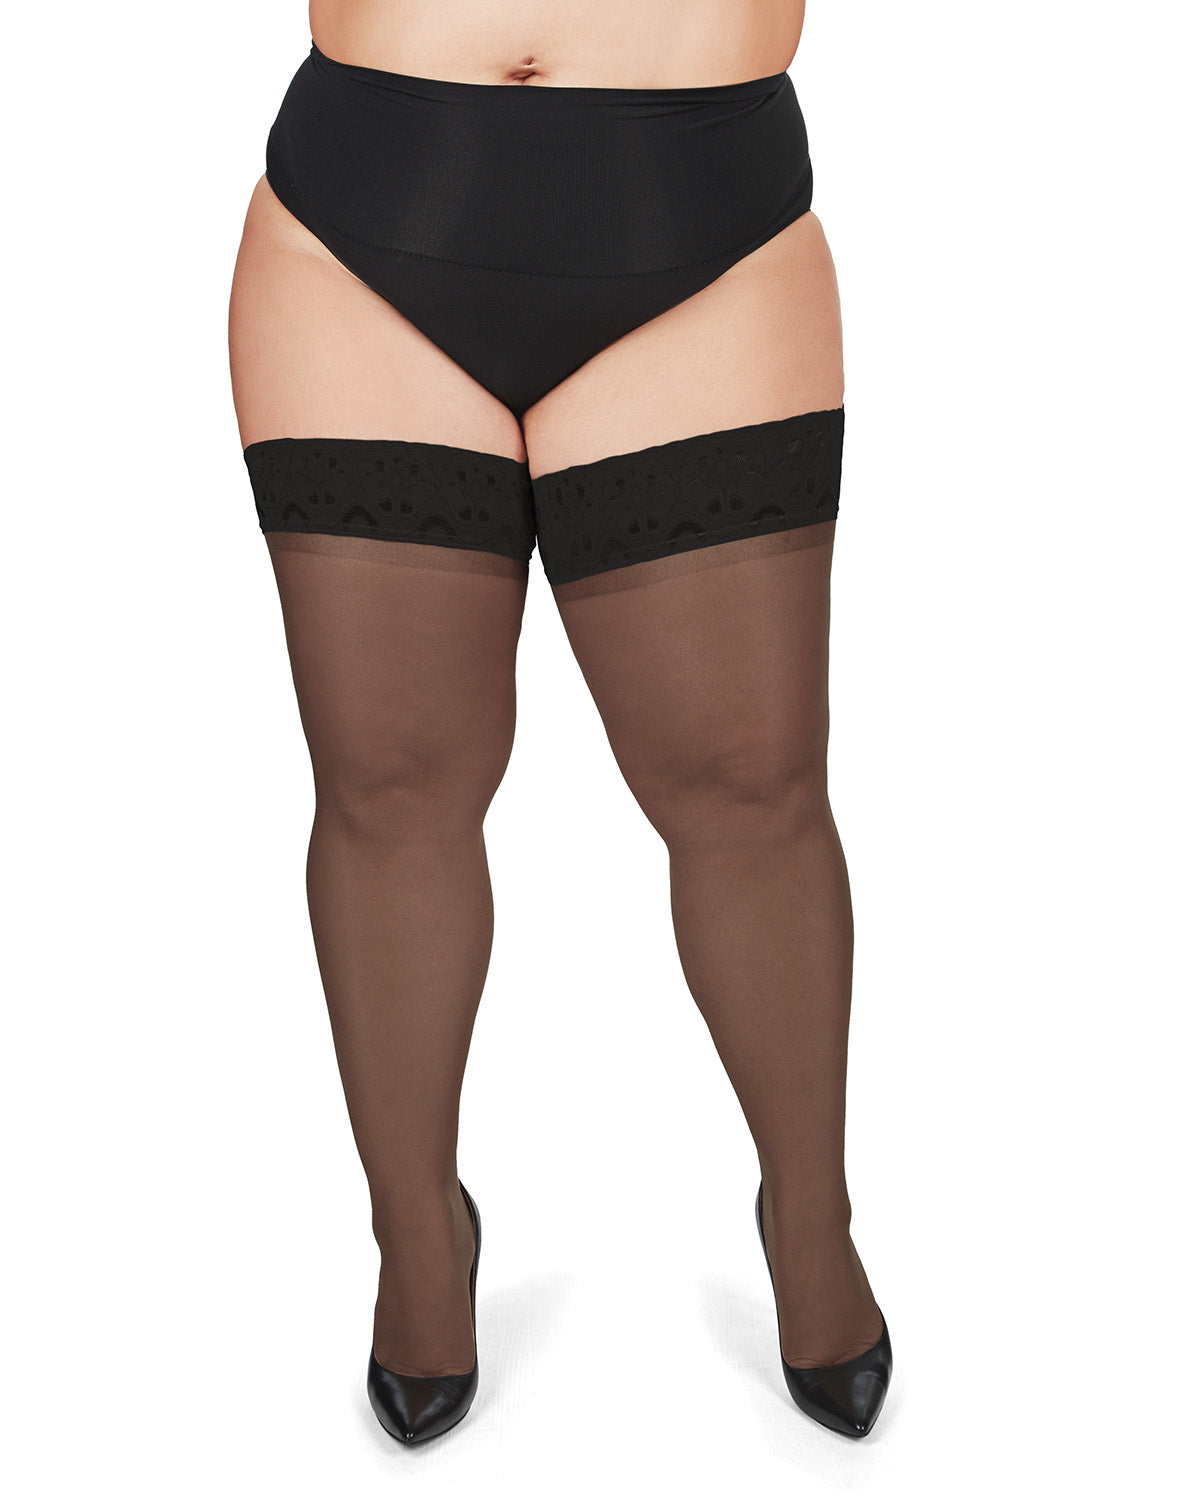 Plus Size Curvy Silky Sheer Lace Top Thigh High Stocking